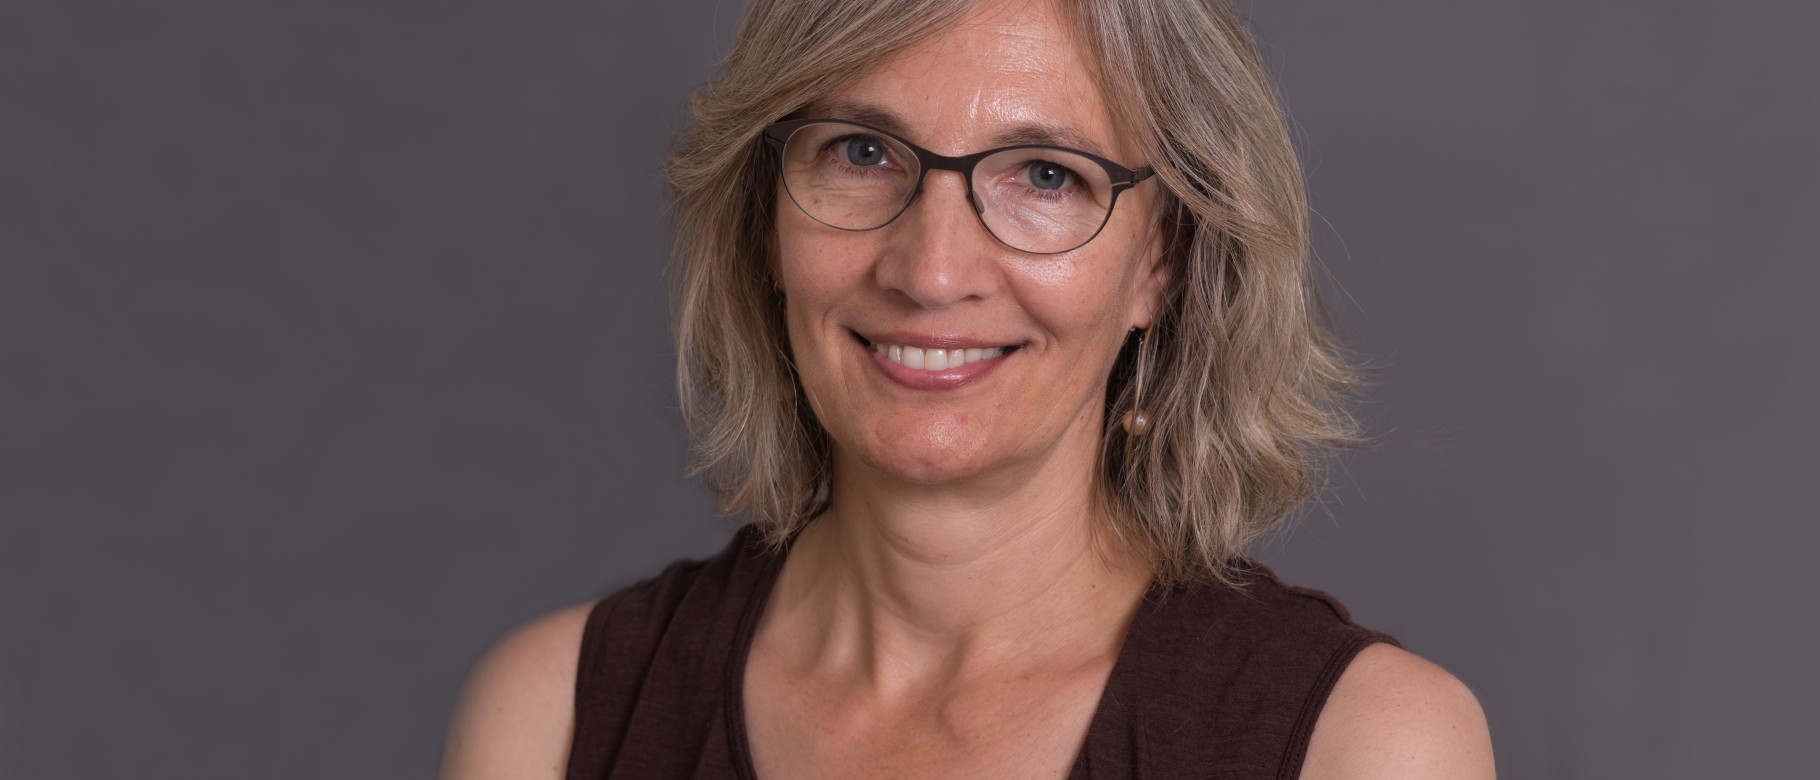 Michele Polacsek is one of the UNE co-authors for a study recently published in the Journal of Nutrition Education and Behavior